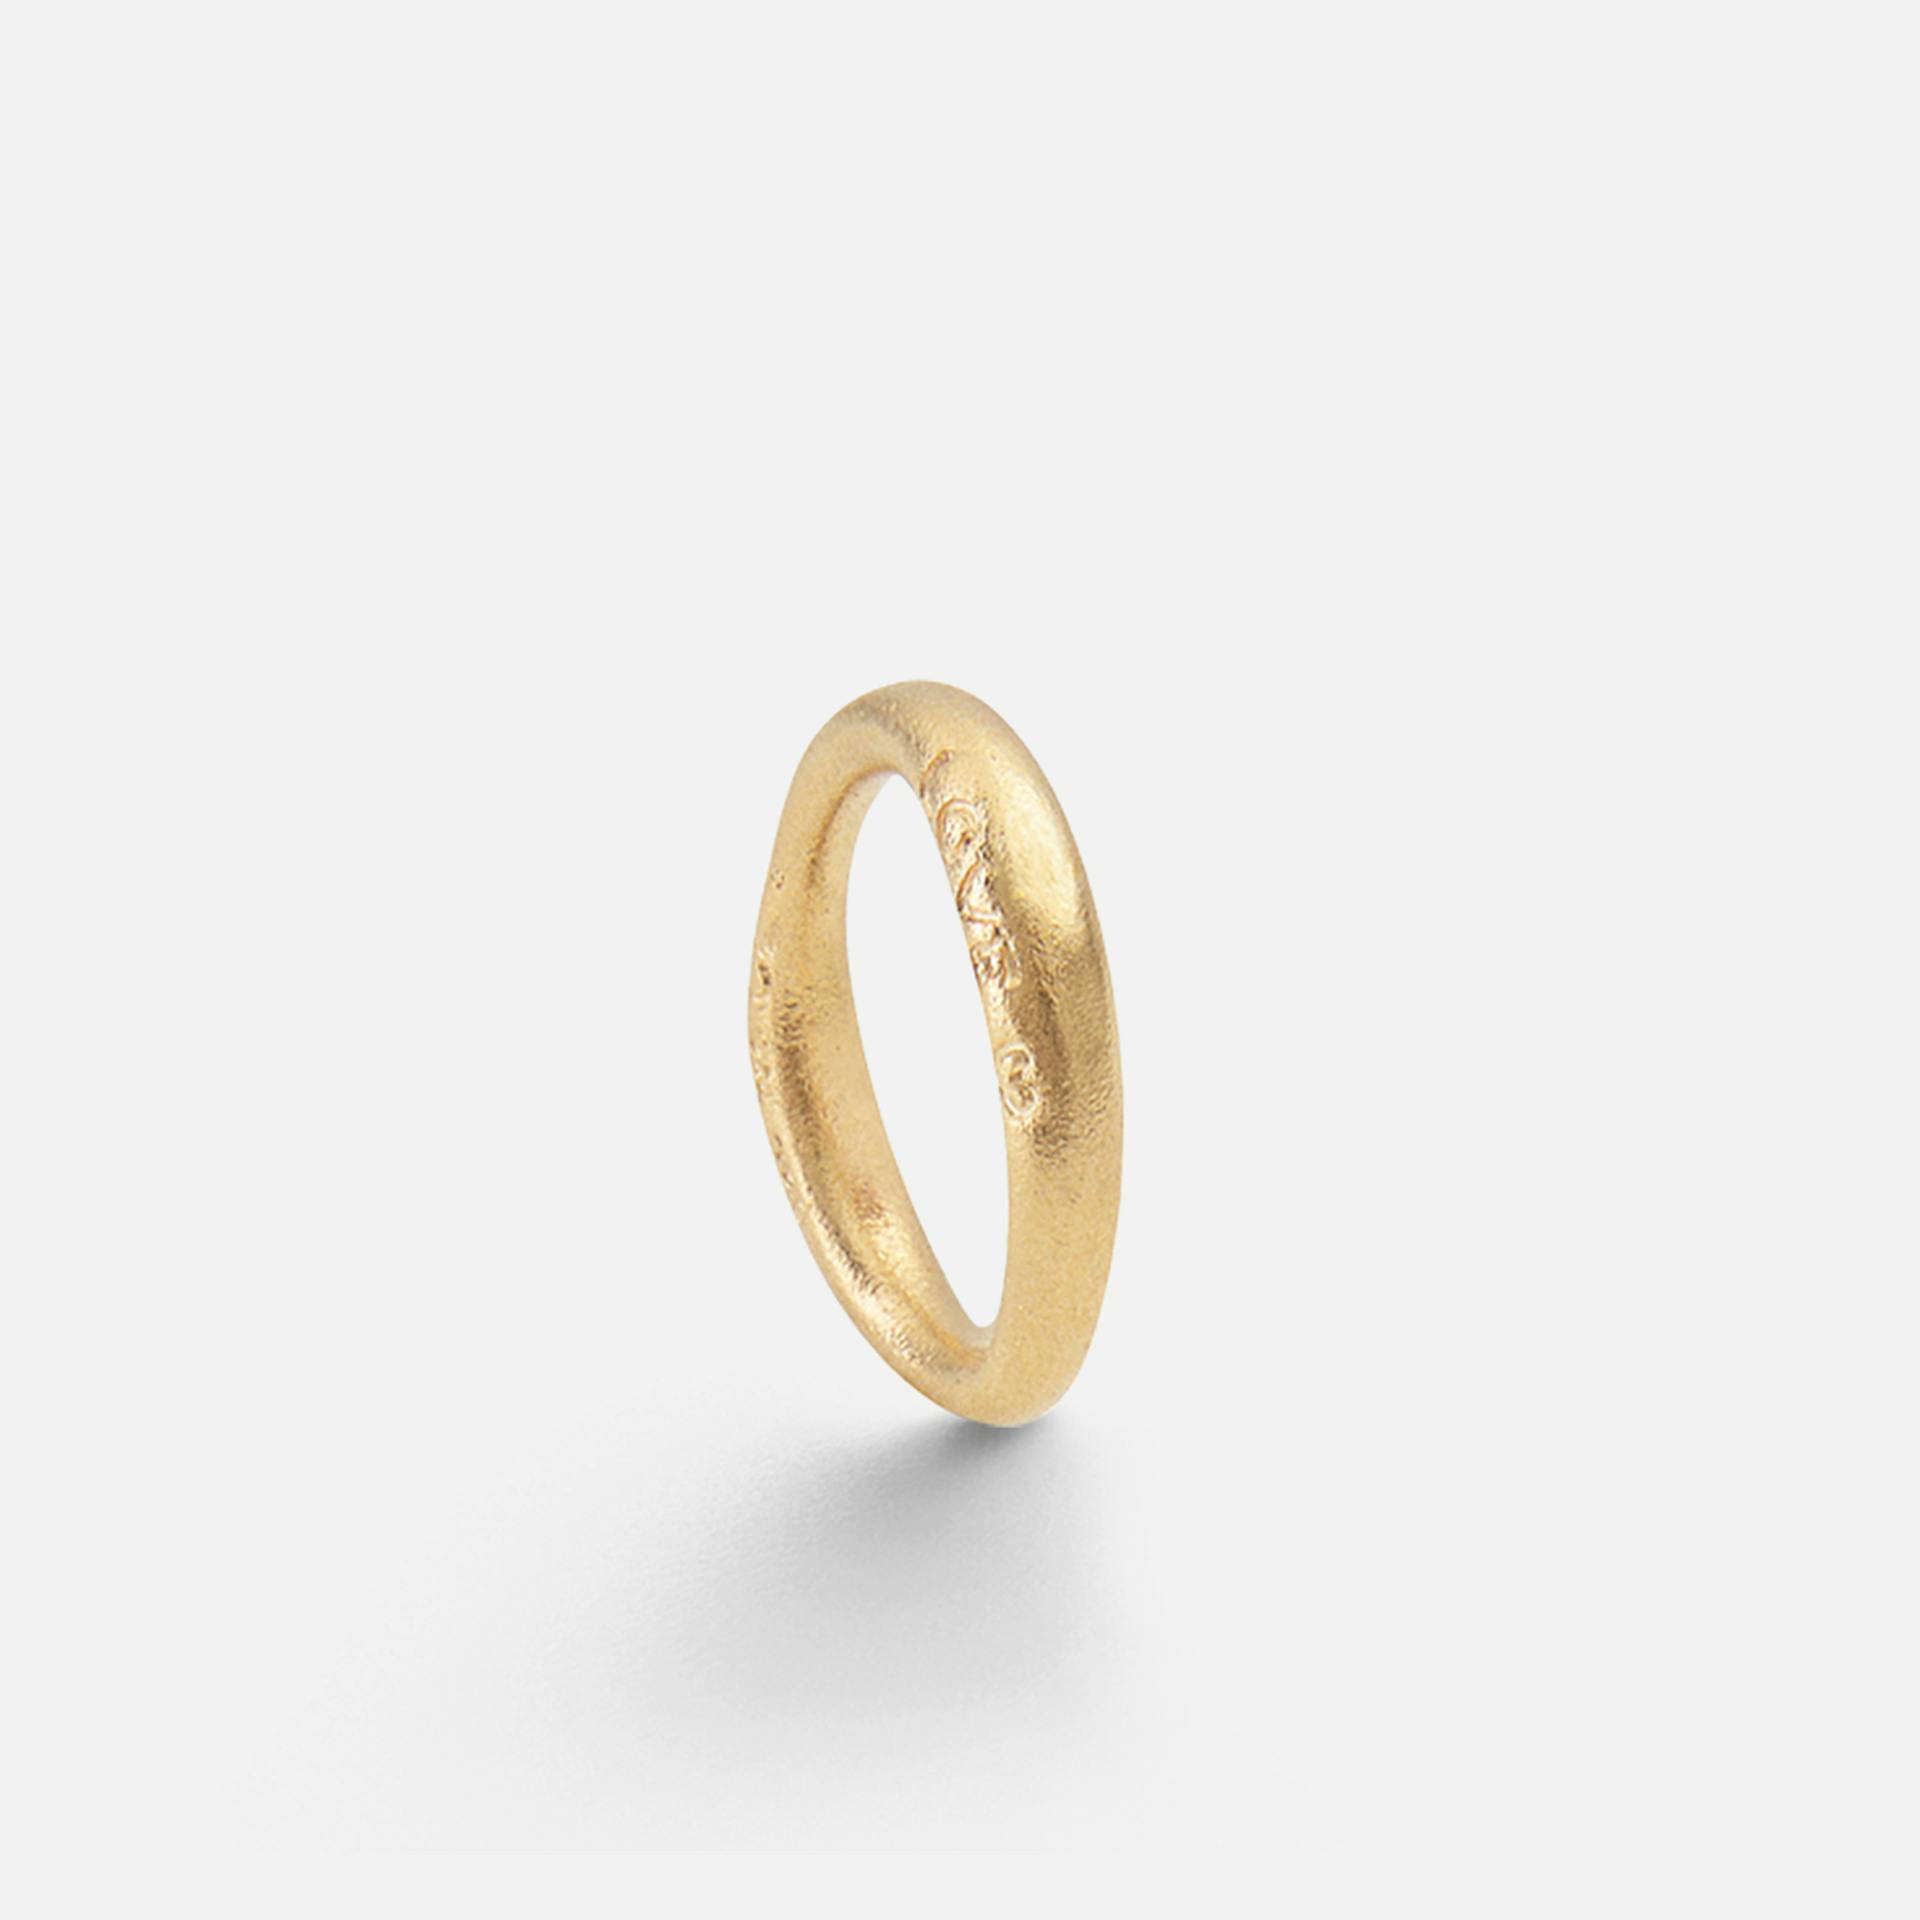 Love ring 3 18k gold textured